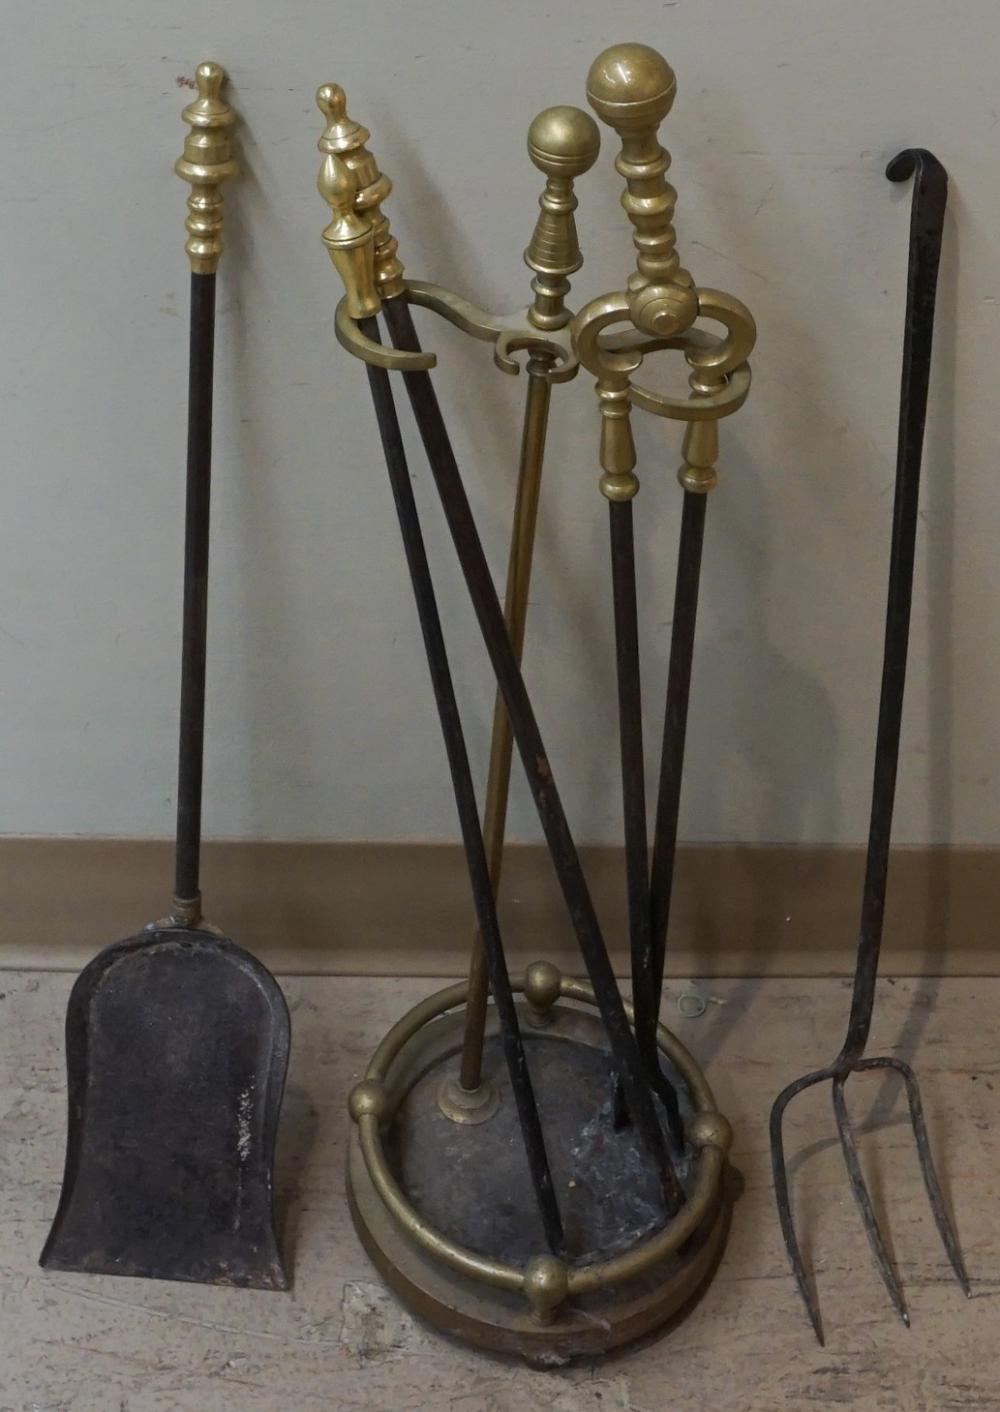 COLLECTION OF BRASS FIRE TOOLS